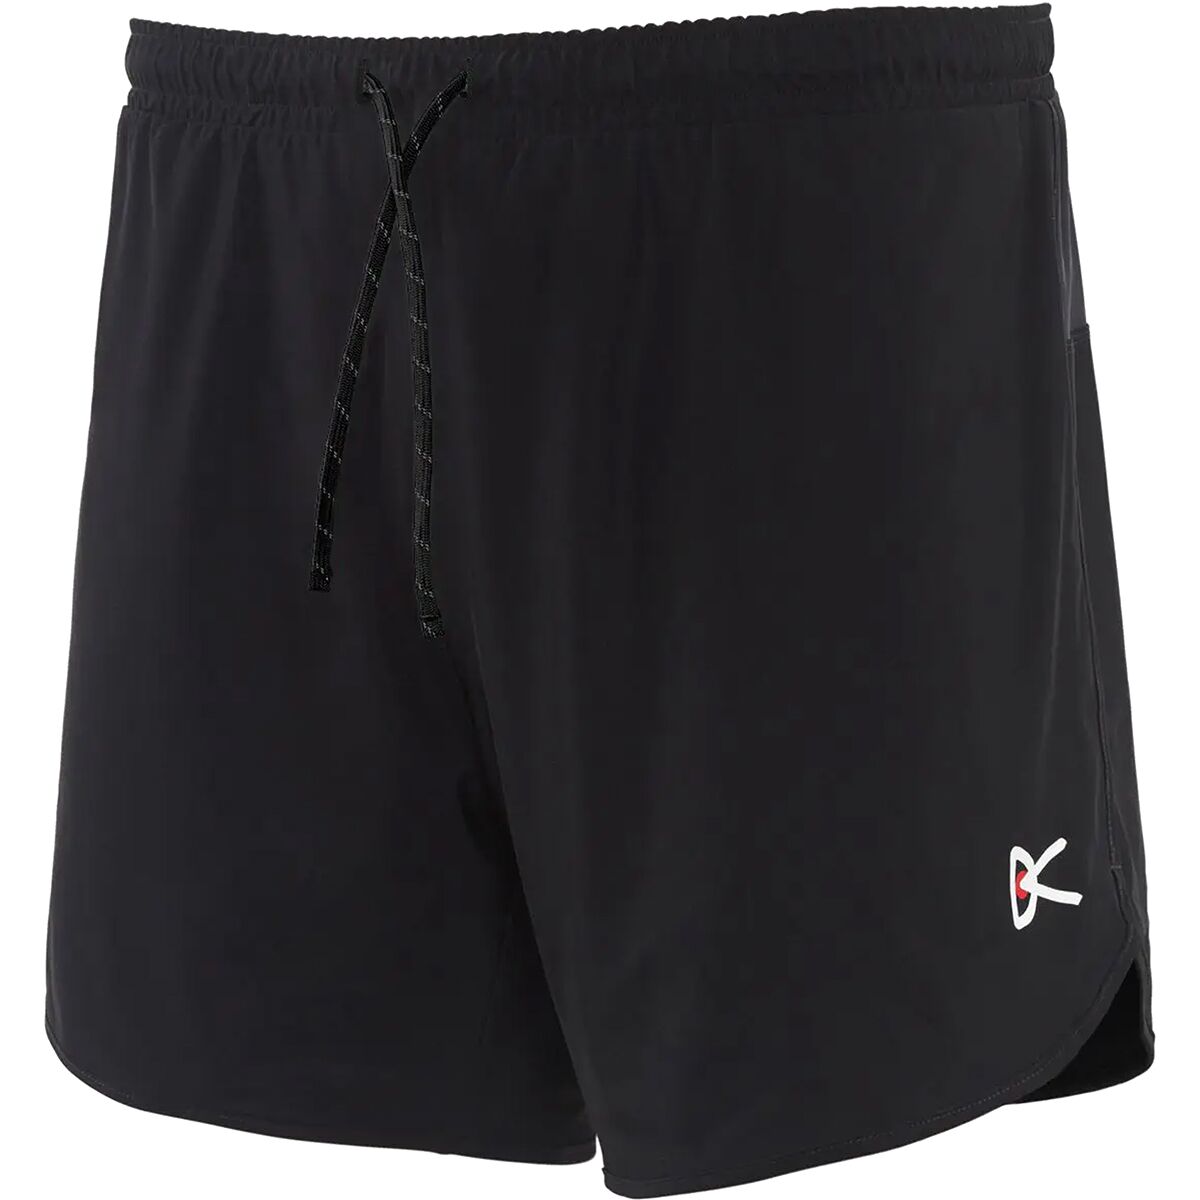 District Vision Spino 5in Training Short - Men's